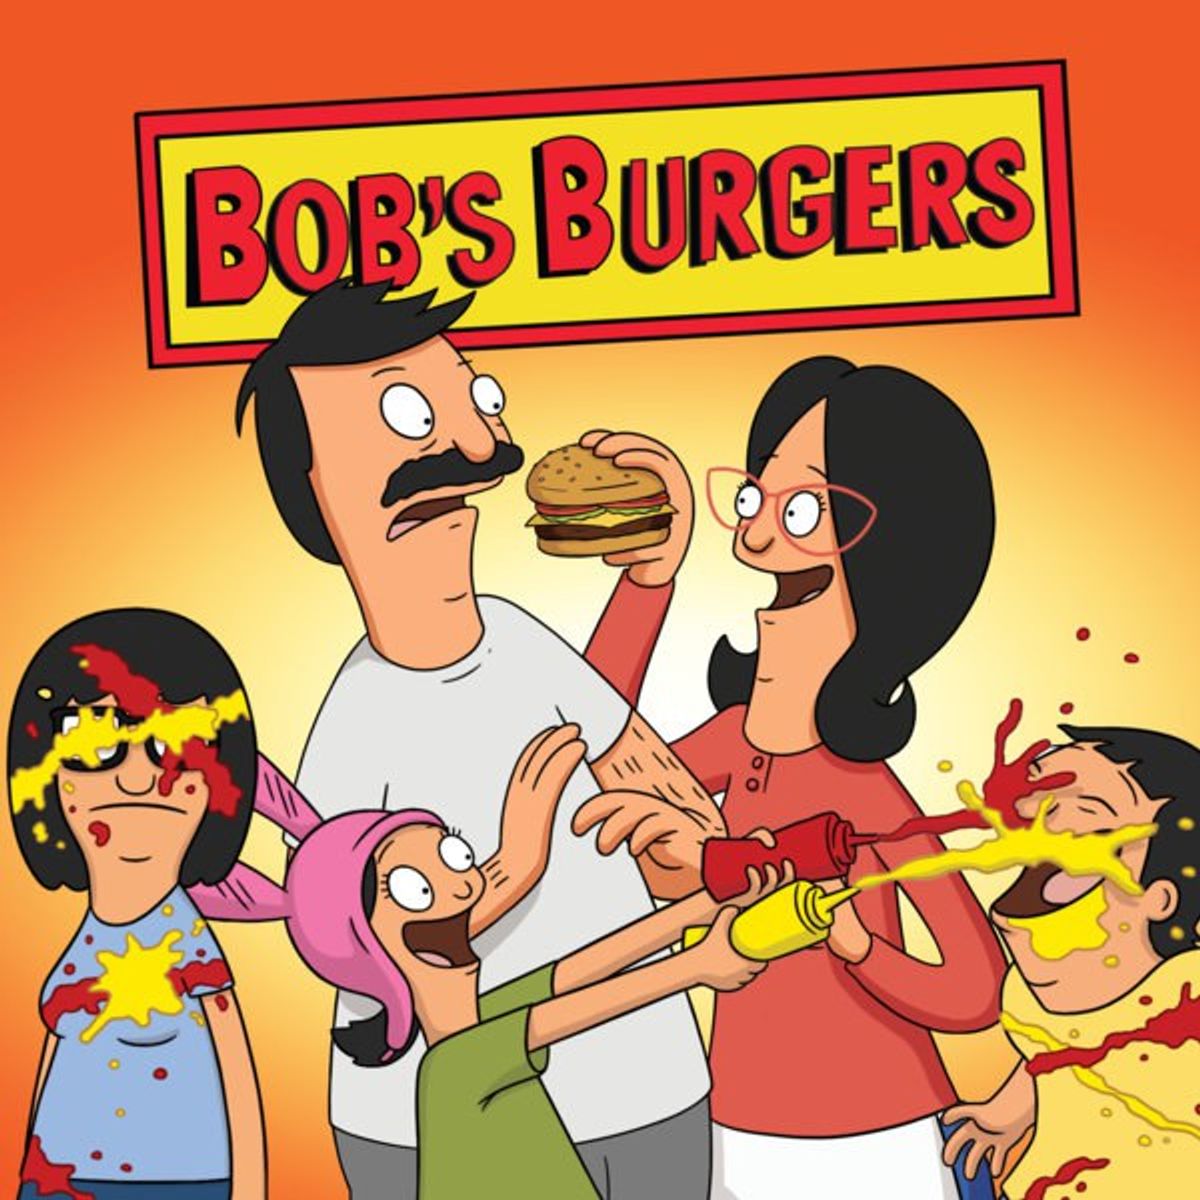 The Dark Side Of Dorm Life As Told By Bob's Burgers